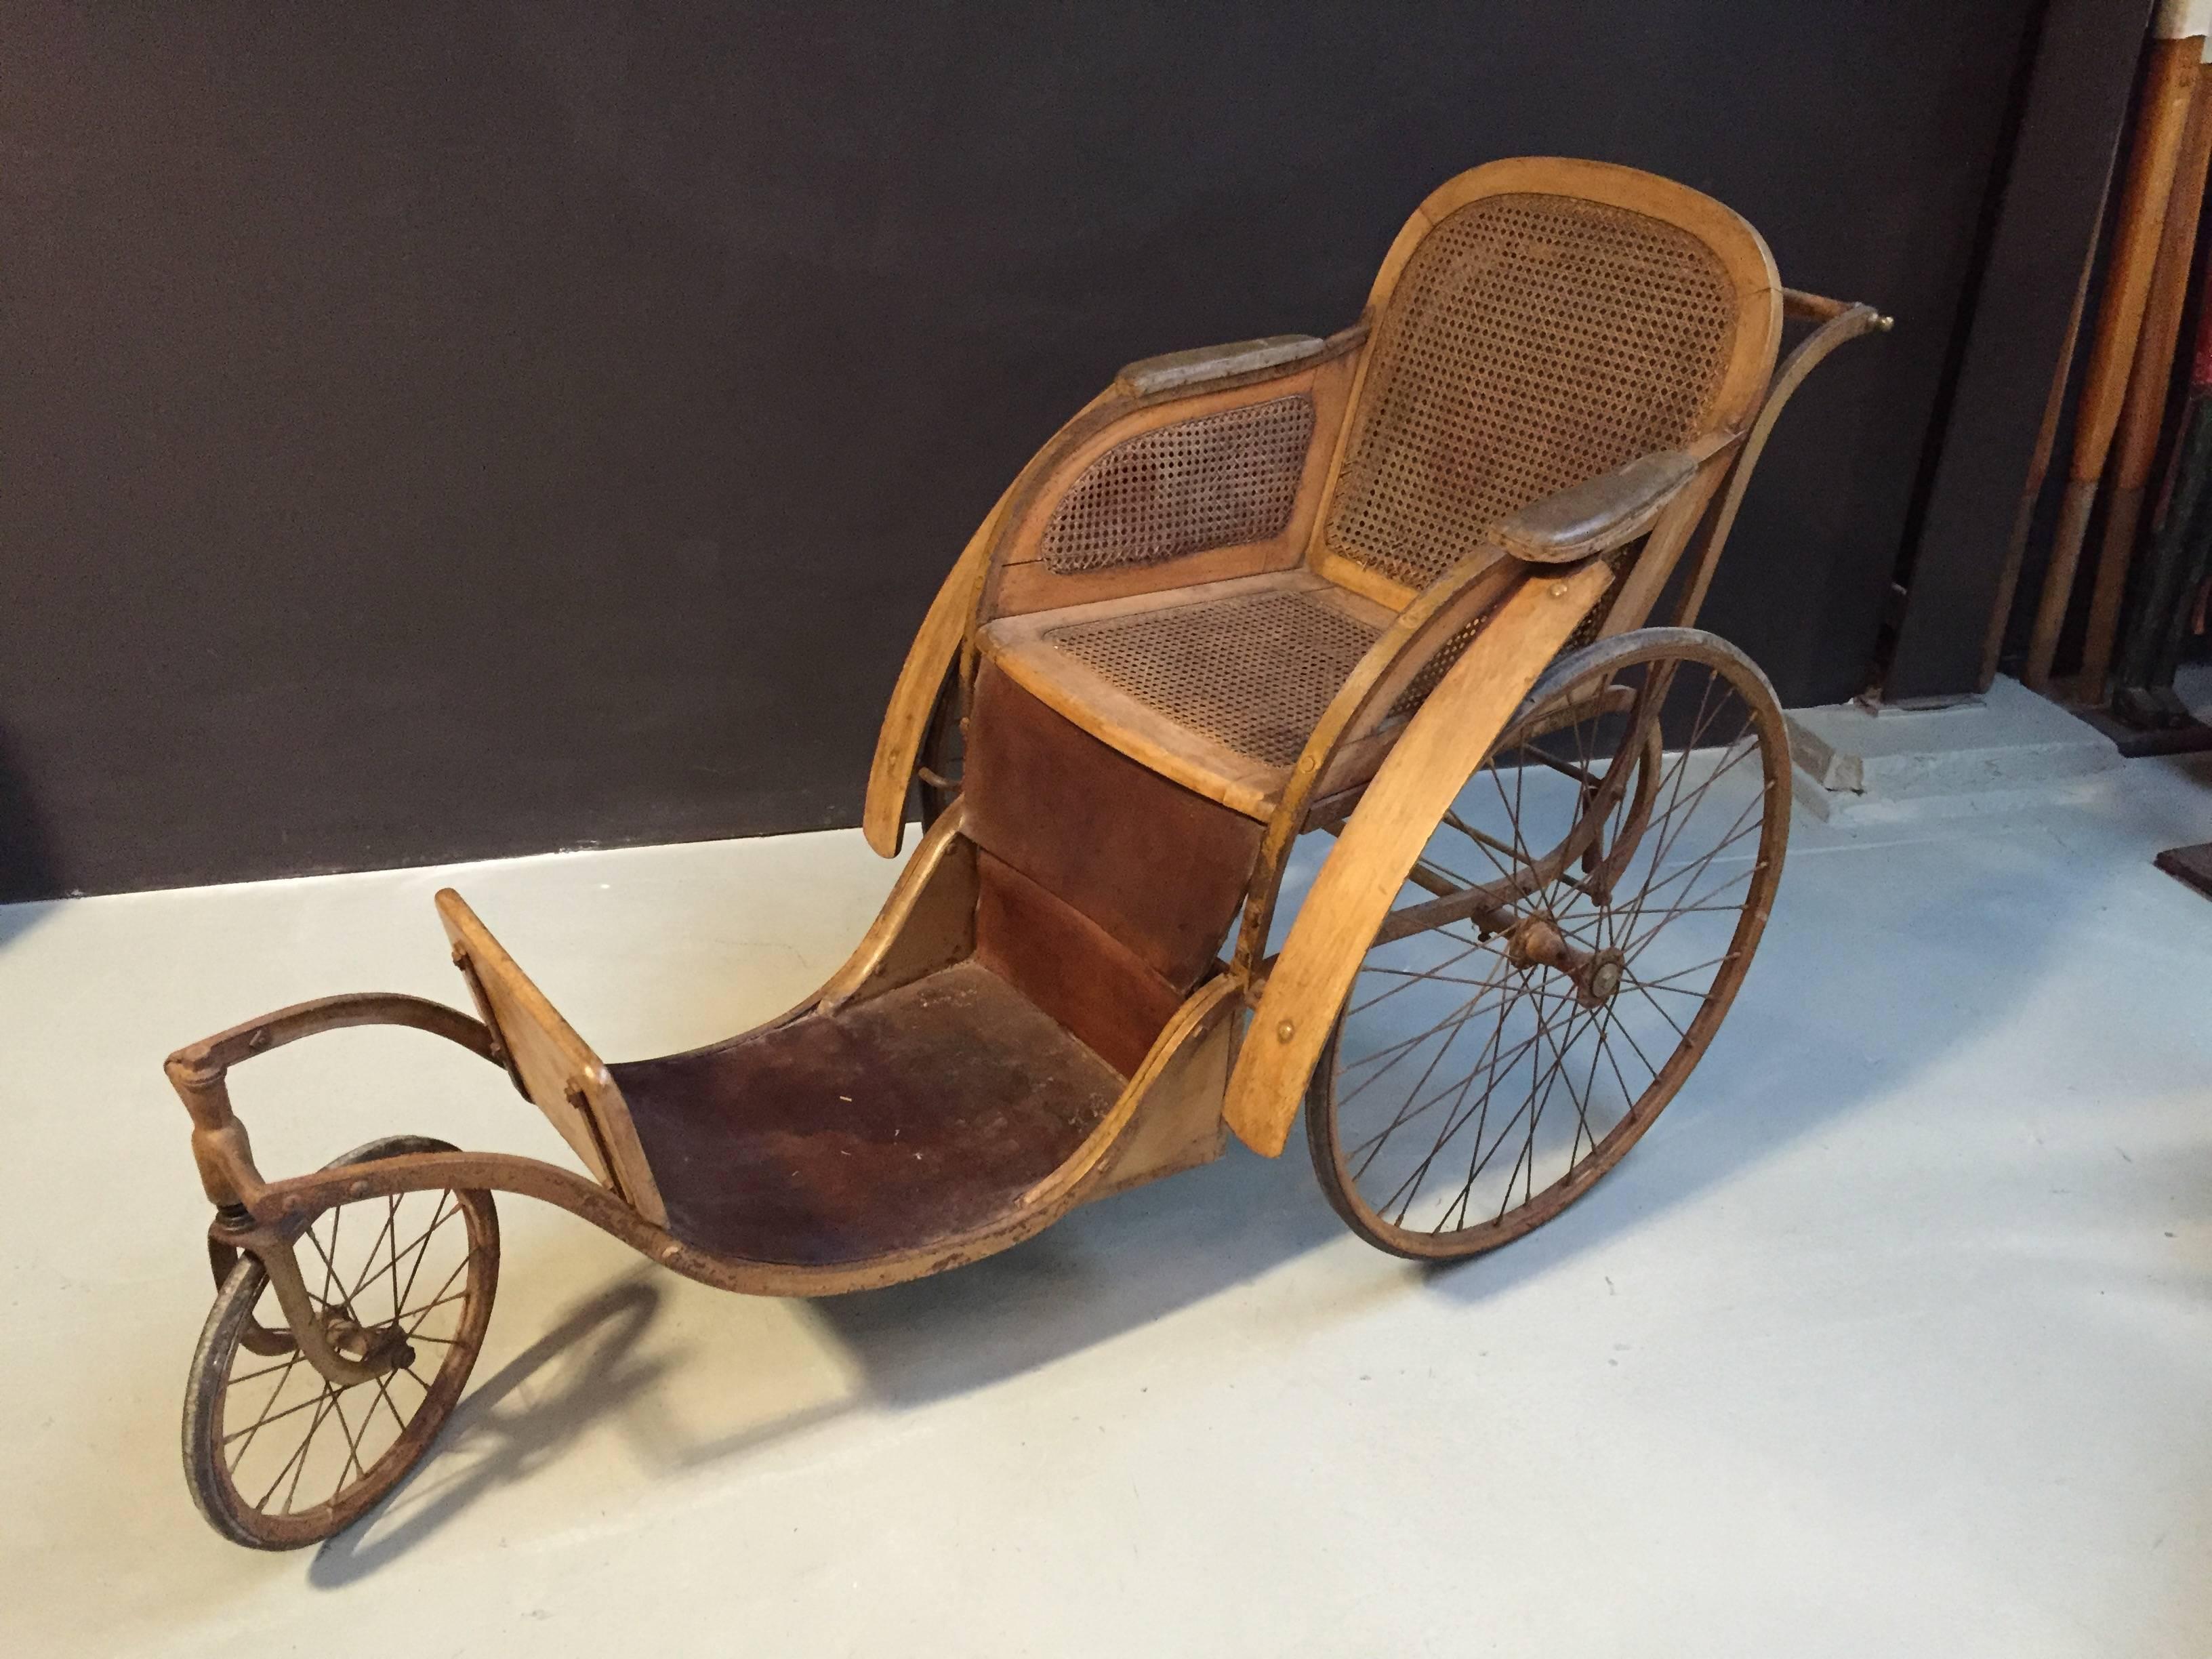 This vintage wheelchair was build in Paris in the 1920's. It has a rattan seat and a leather footboard.

